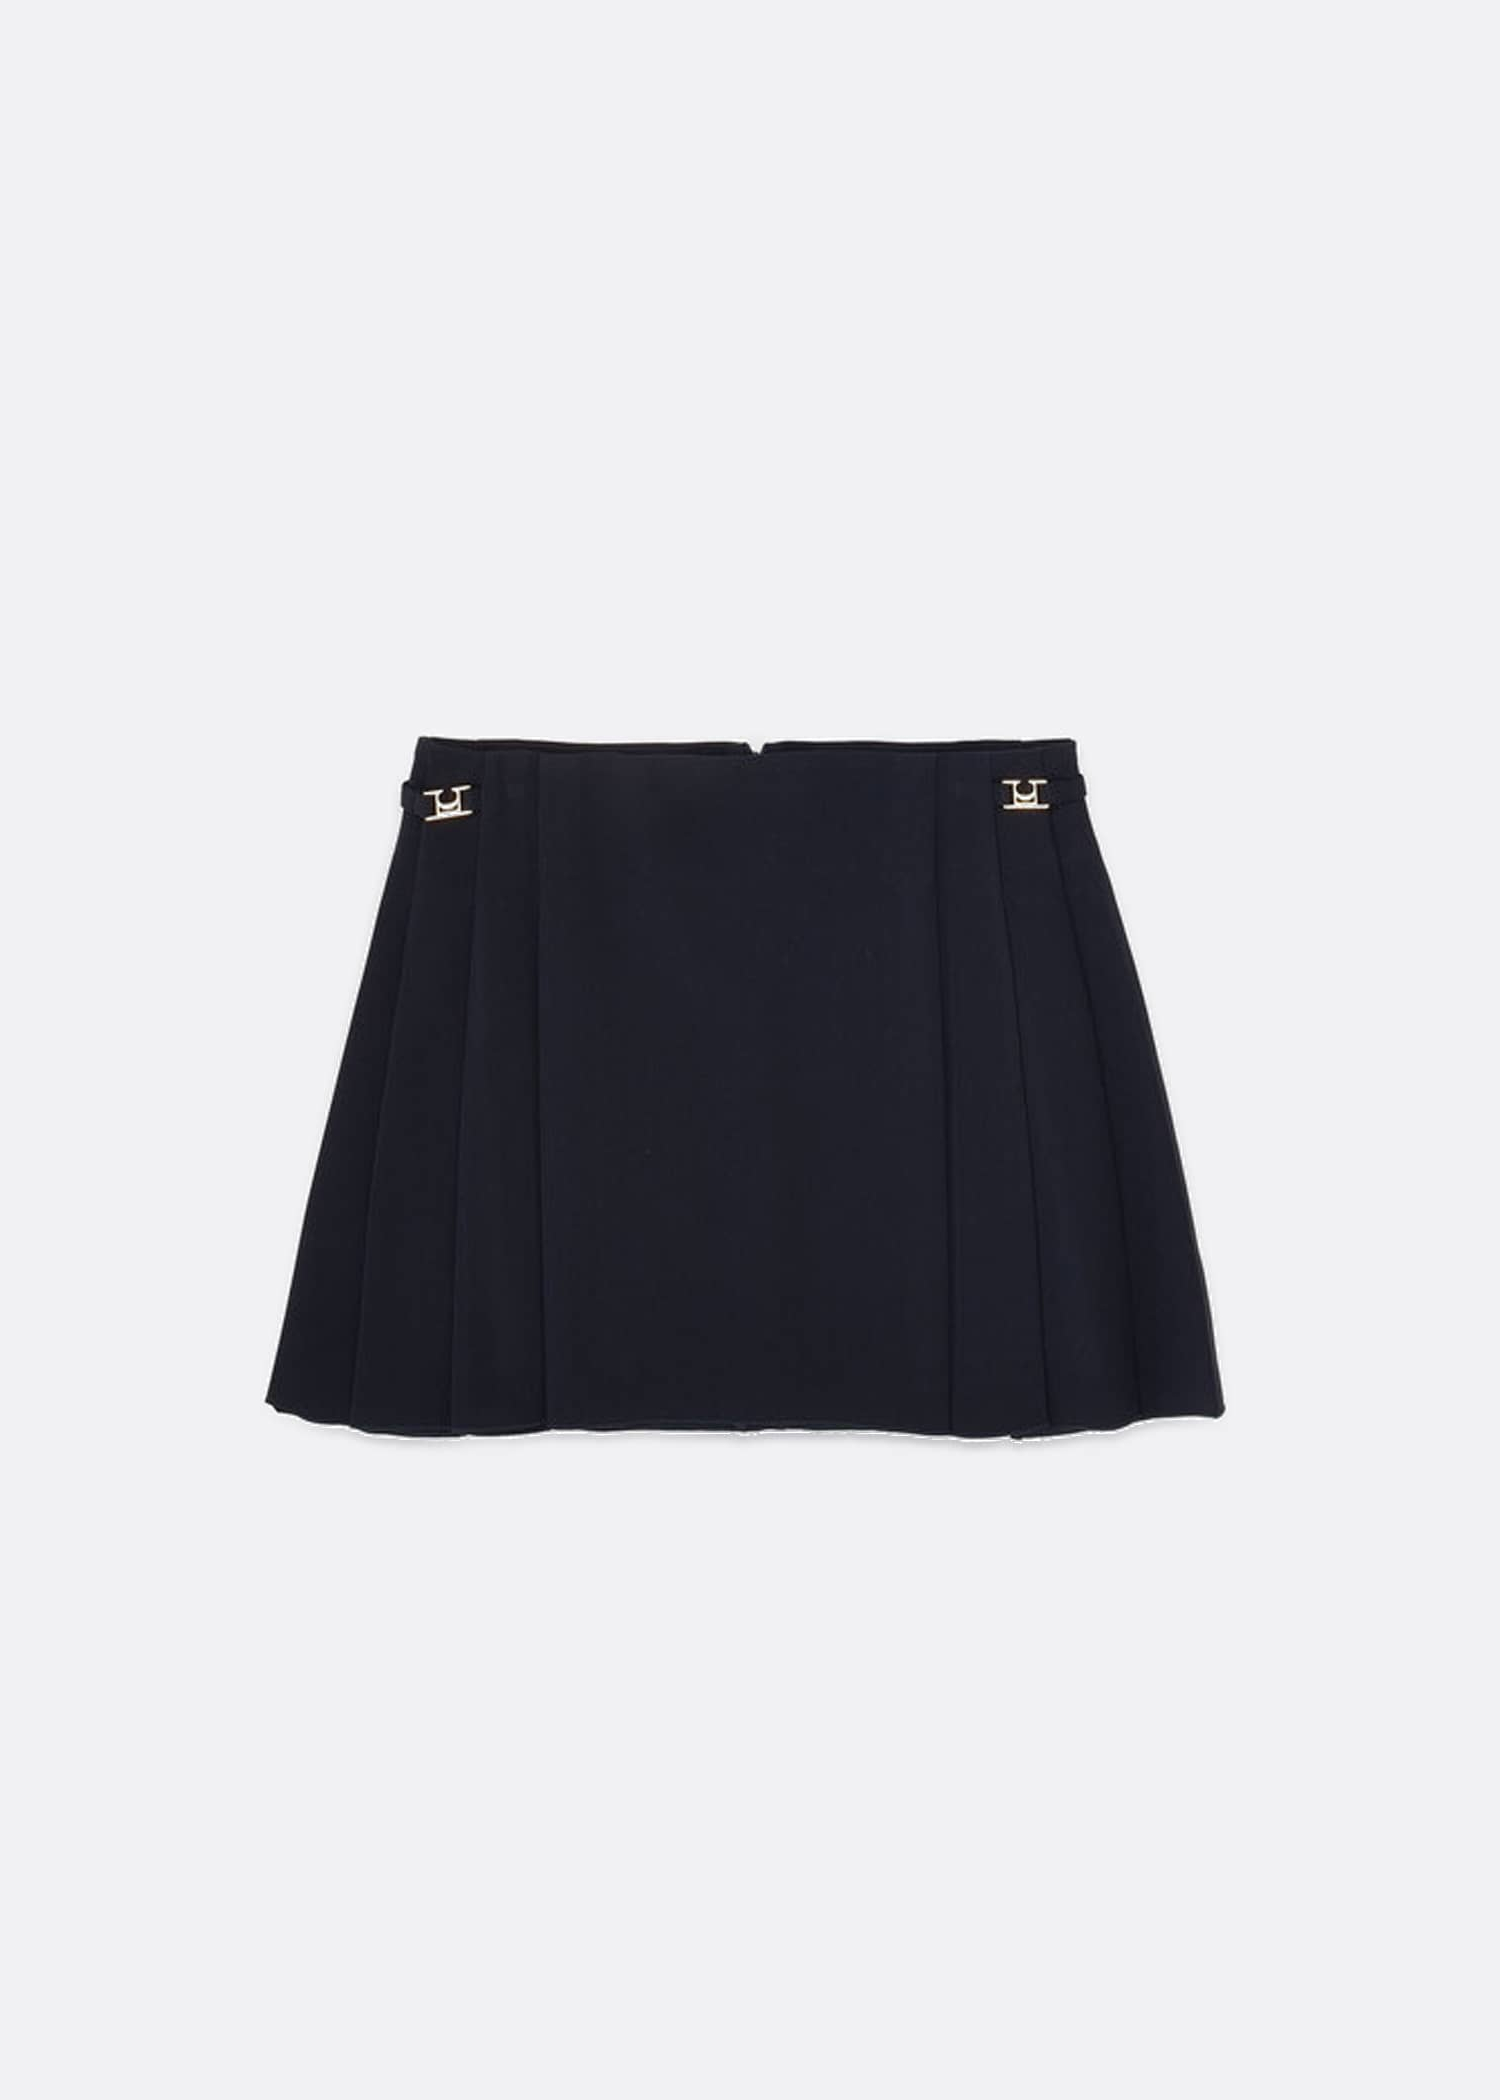 Low Classic Short Pleated Skirt